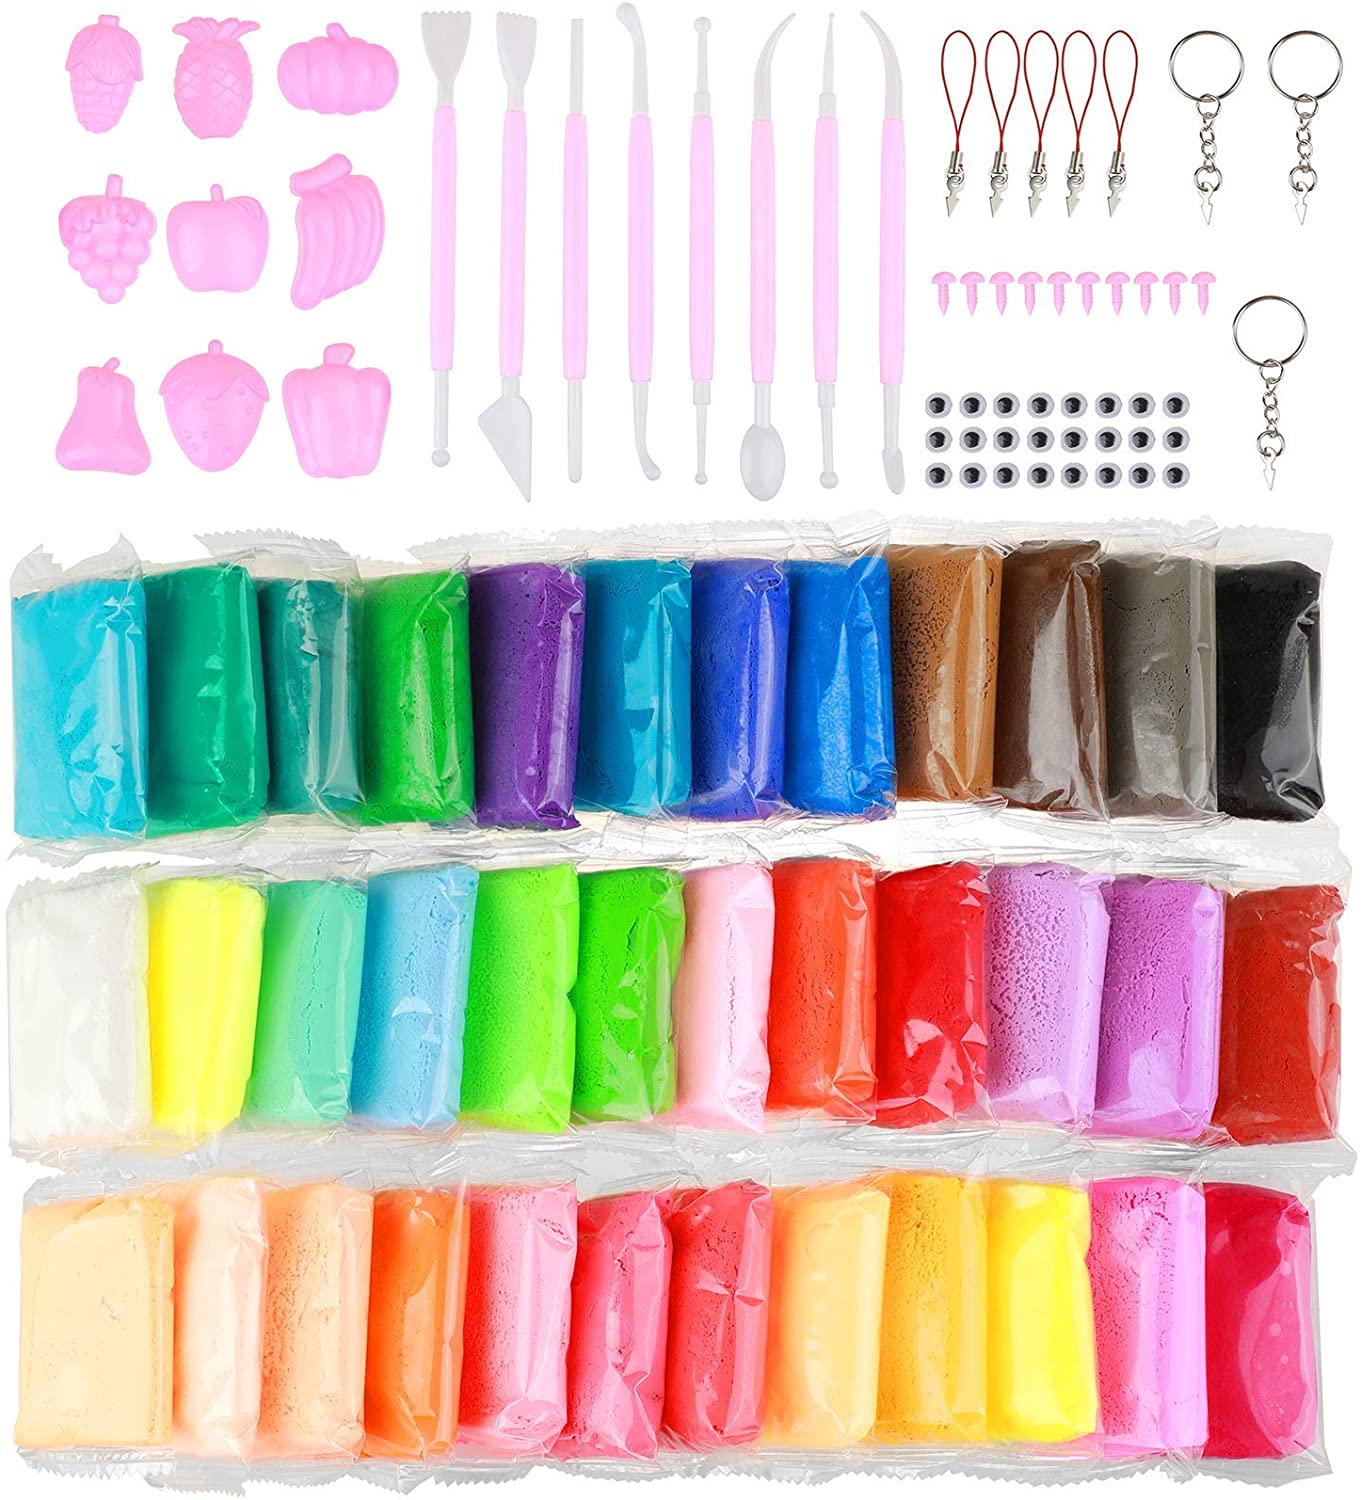 36 Color reusable clay for kids children Modeling clay set Educational baby gift 